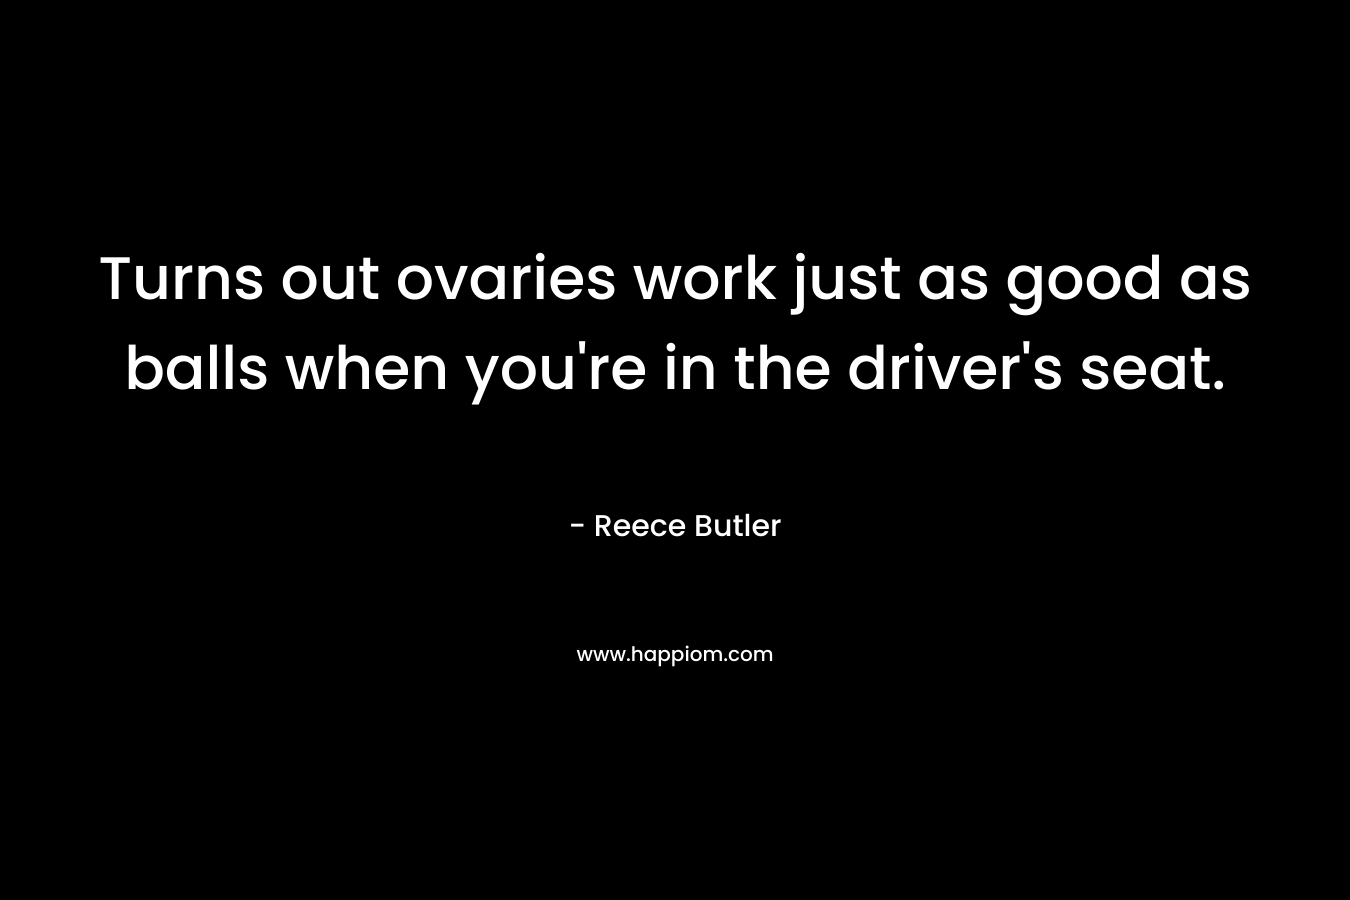 Turns out ovaries work just as good as balls when you’re in the driver’s seat. – Reece Butler